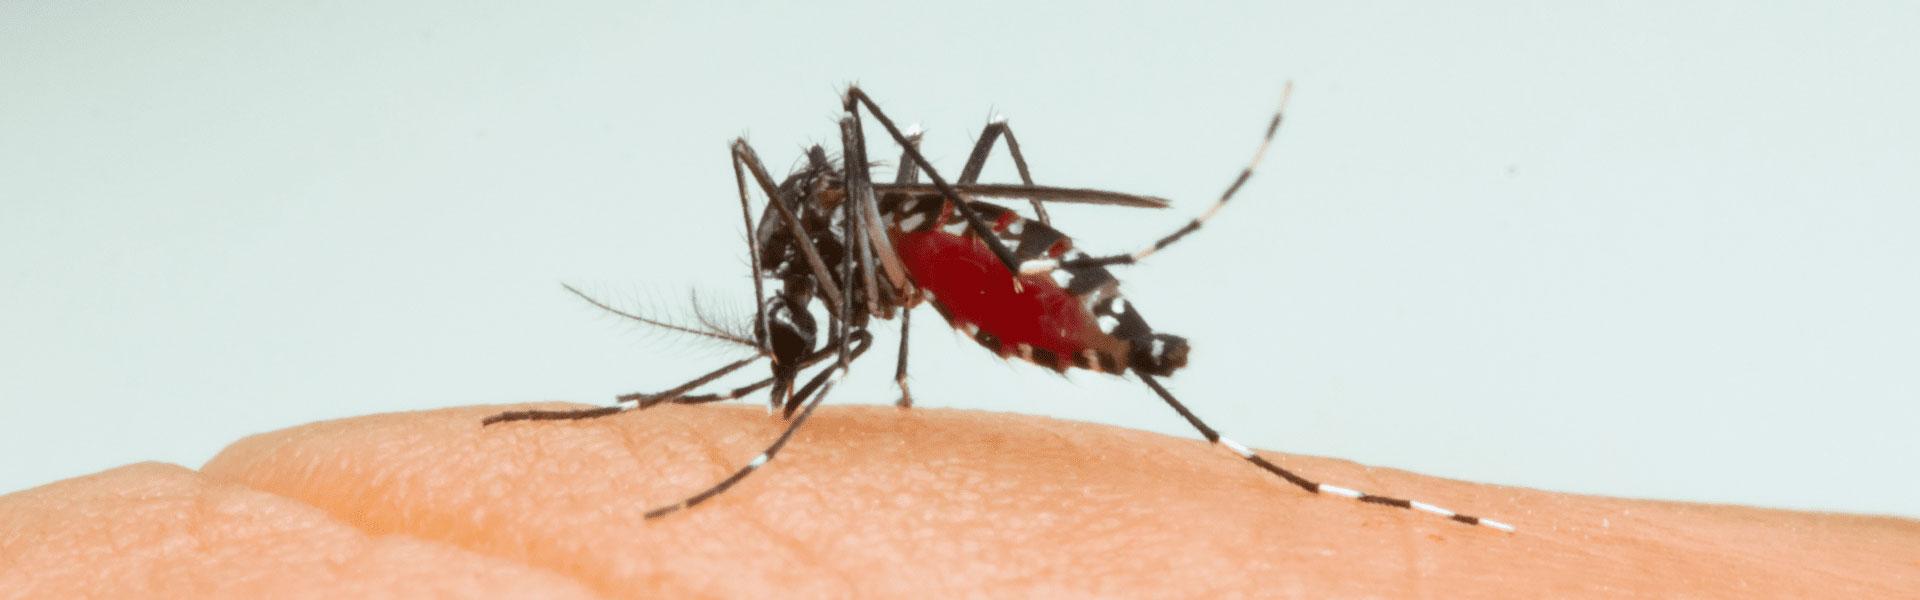 asian tiger mosquito biting person